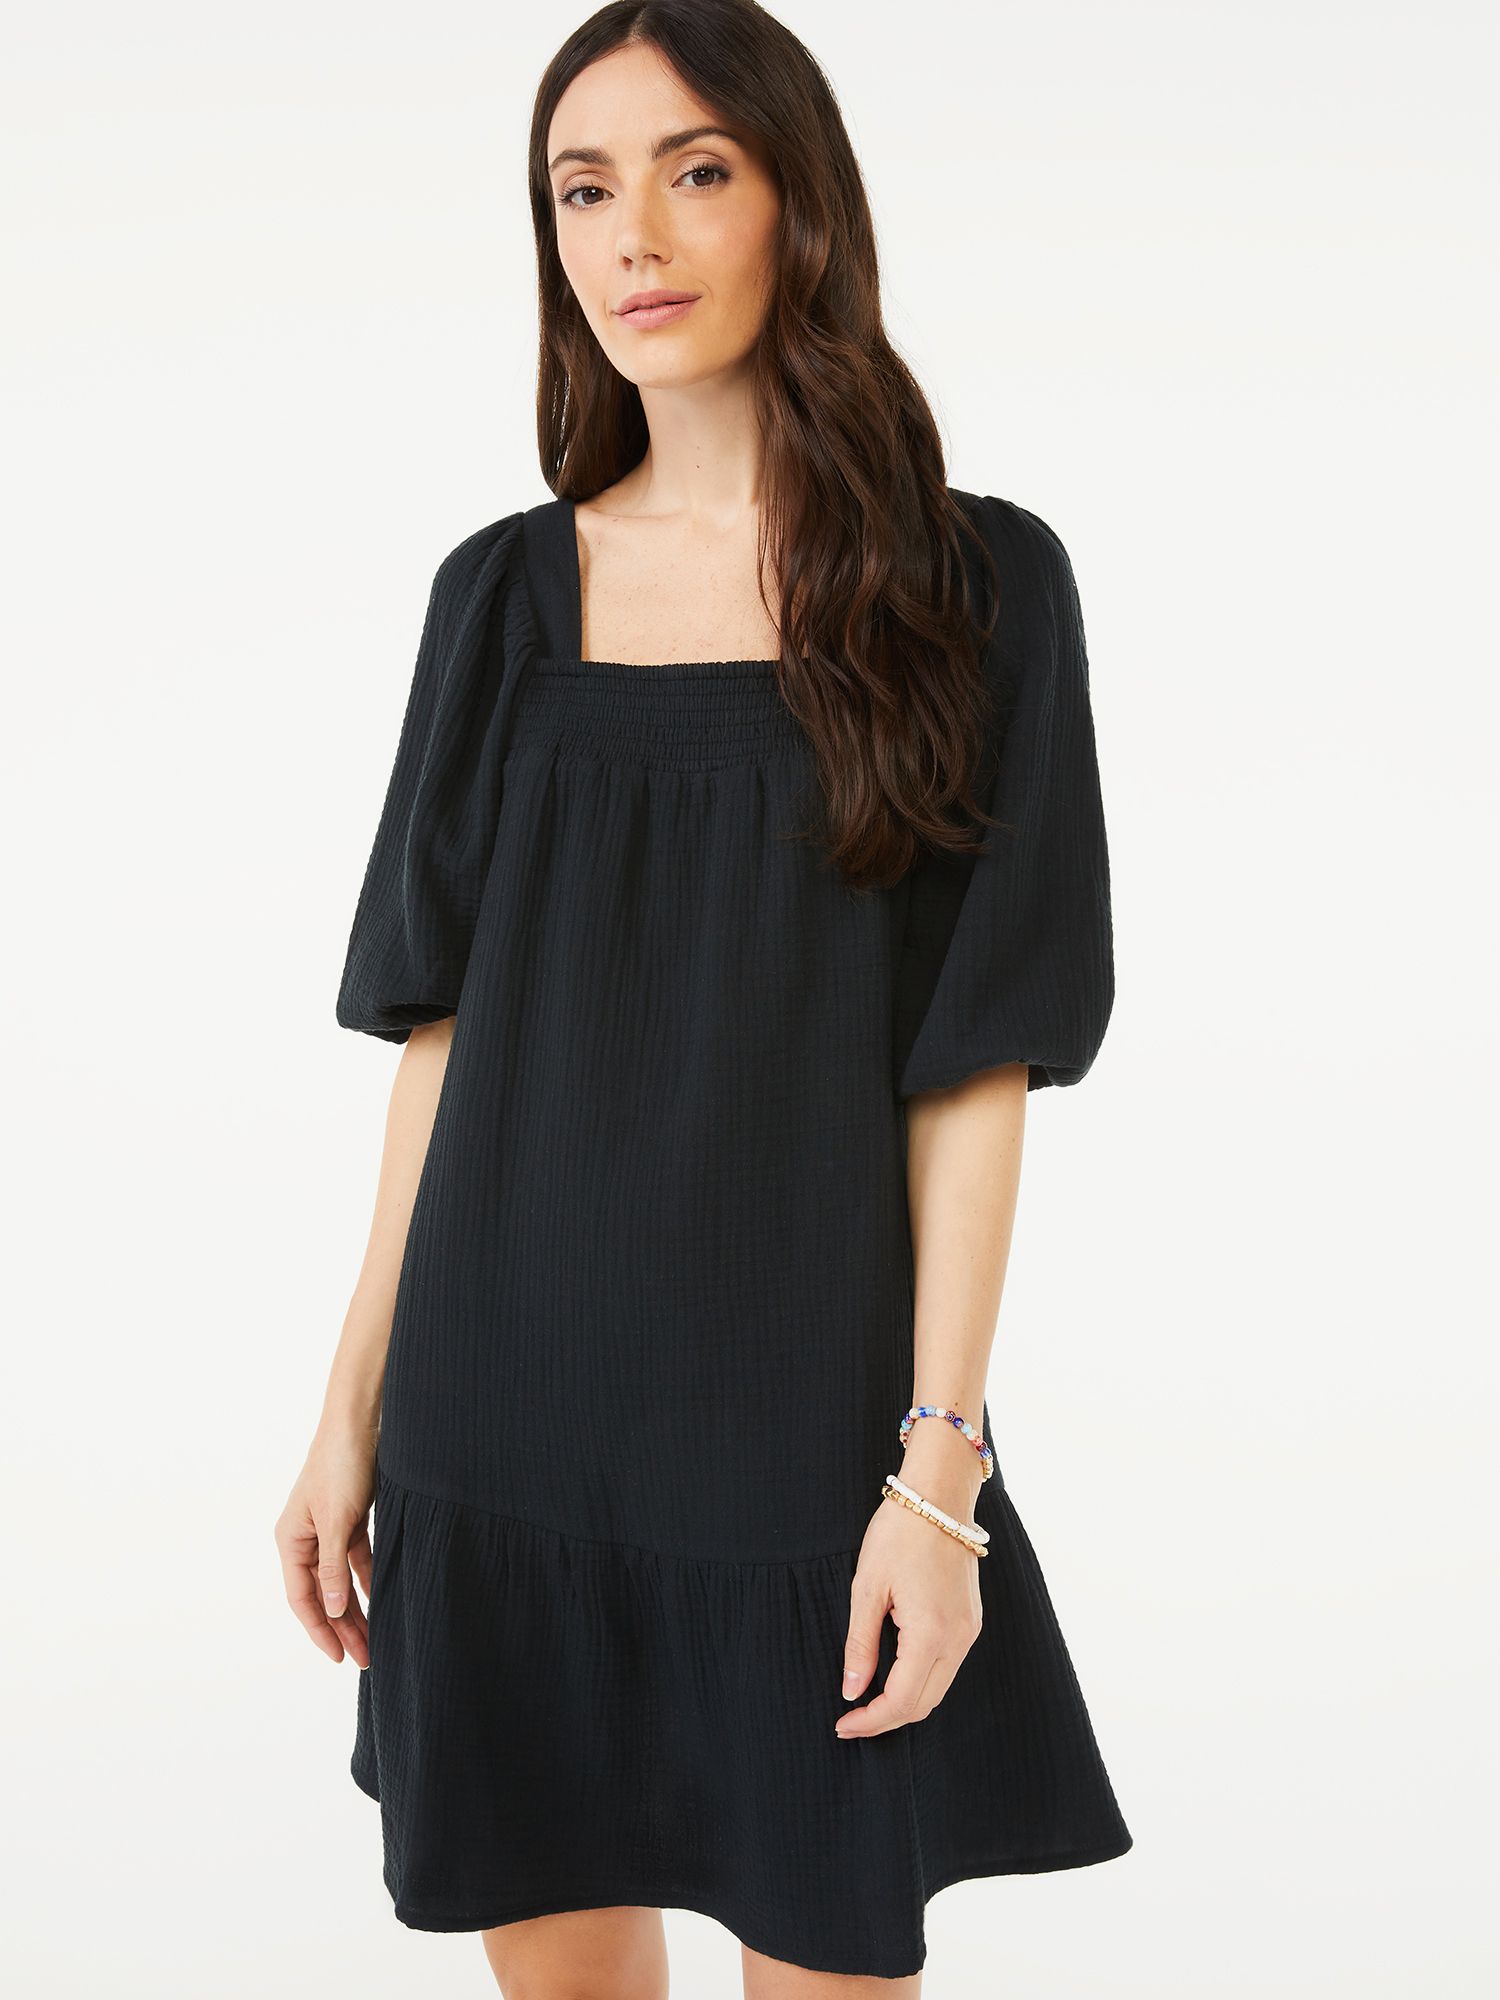 Scoop Women's A-Line Short Dress with Puff Sleeves | Walmart (US)